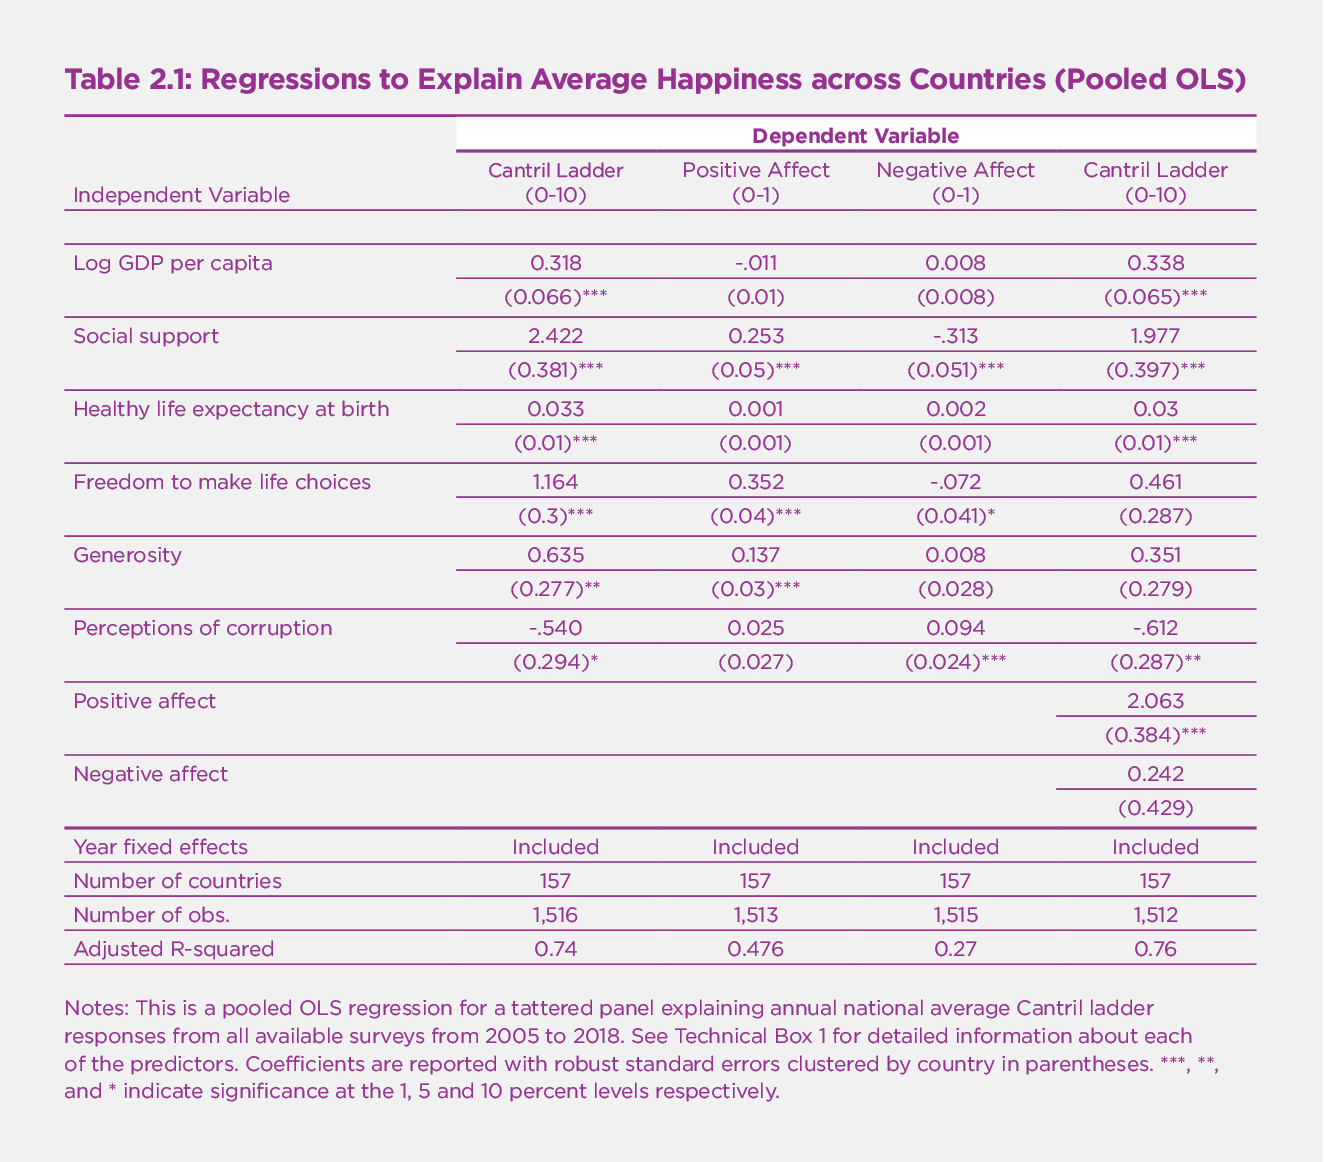 Table 2.1: Regressions to Explain Average Happiness across Countries (Pooled OLS)